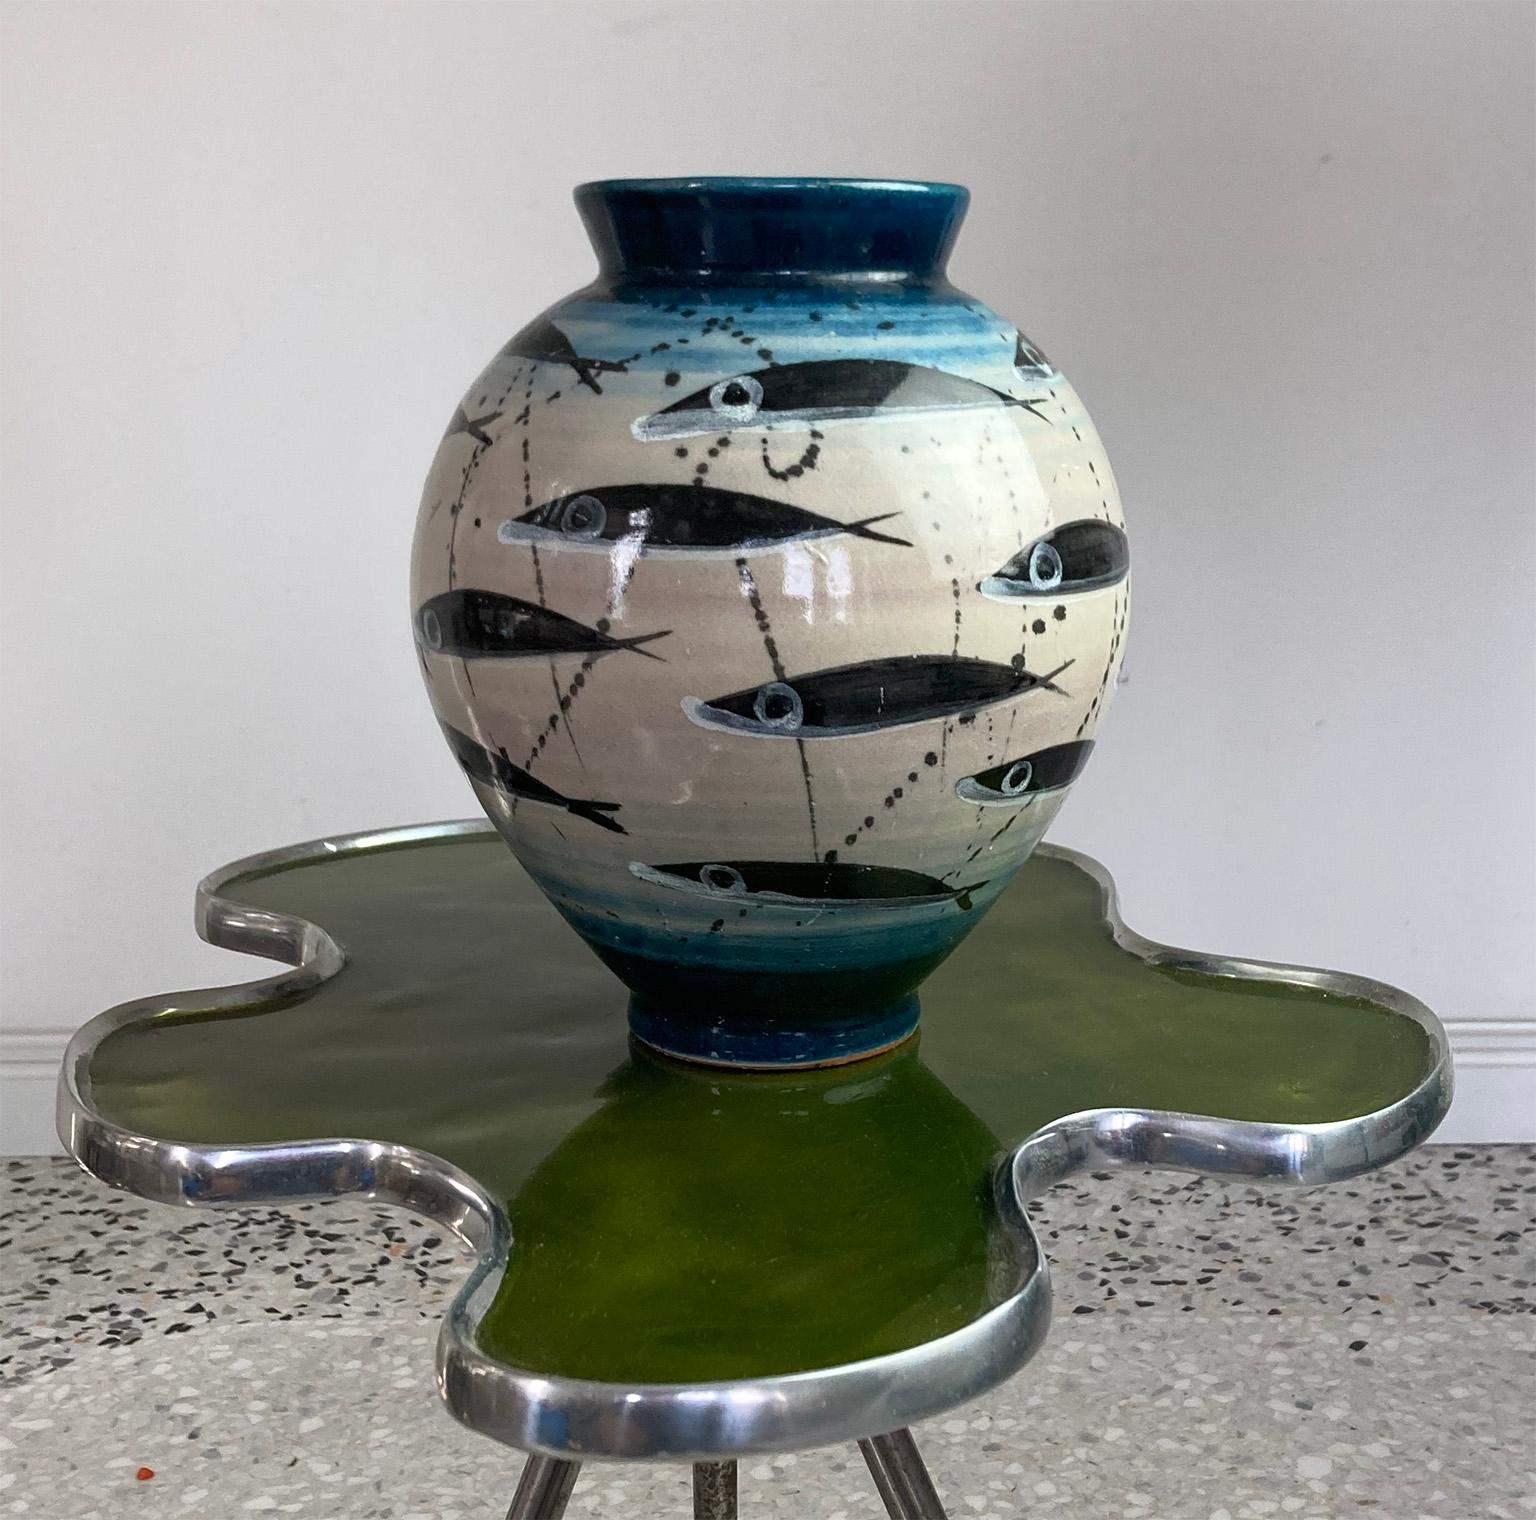 Beautiful handmade ceramic vase turned and decorated by Lucio Liguori, with characteristic “Alici’ theme.

Bio:
Located in Raito, a few steps from Vietri sul Mare, there is the laboratory of Lucio Liguori, the most important ceramist of the